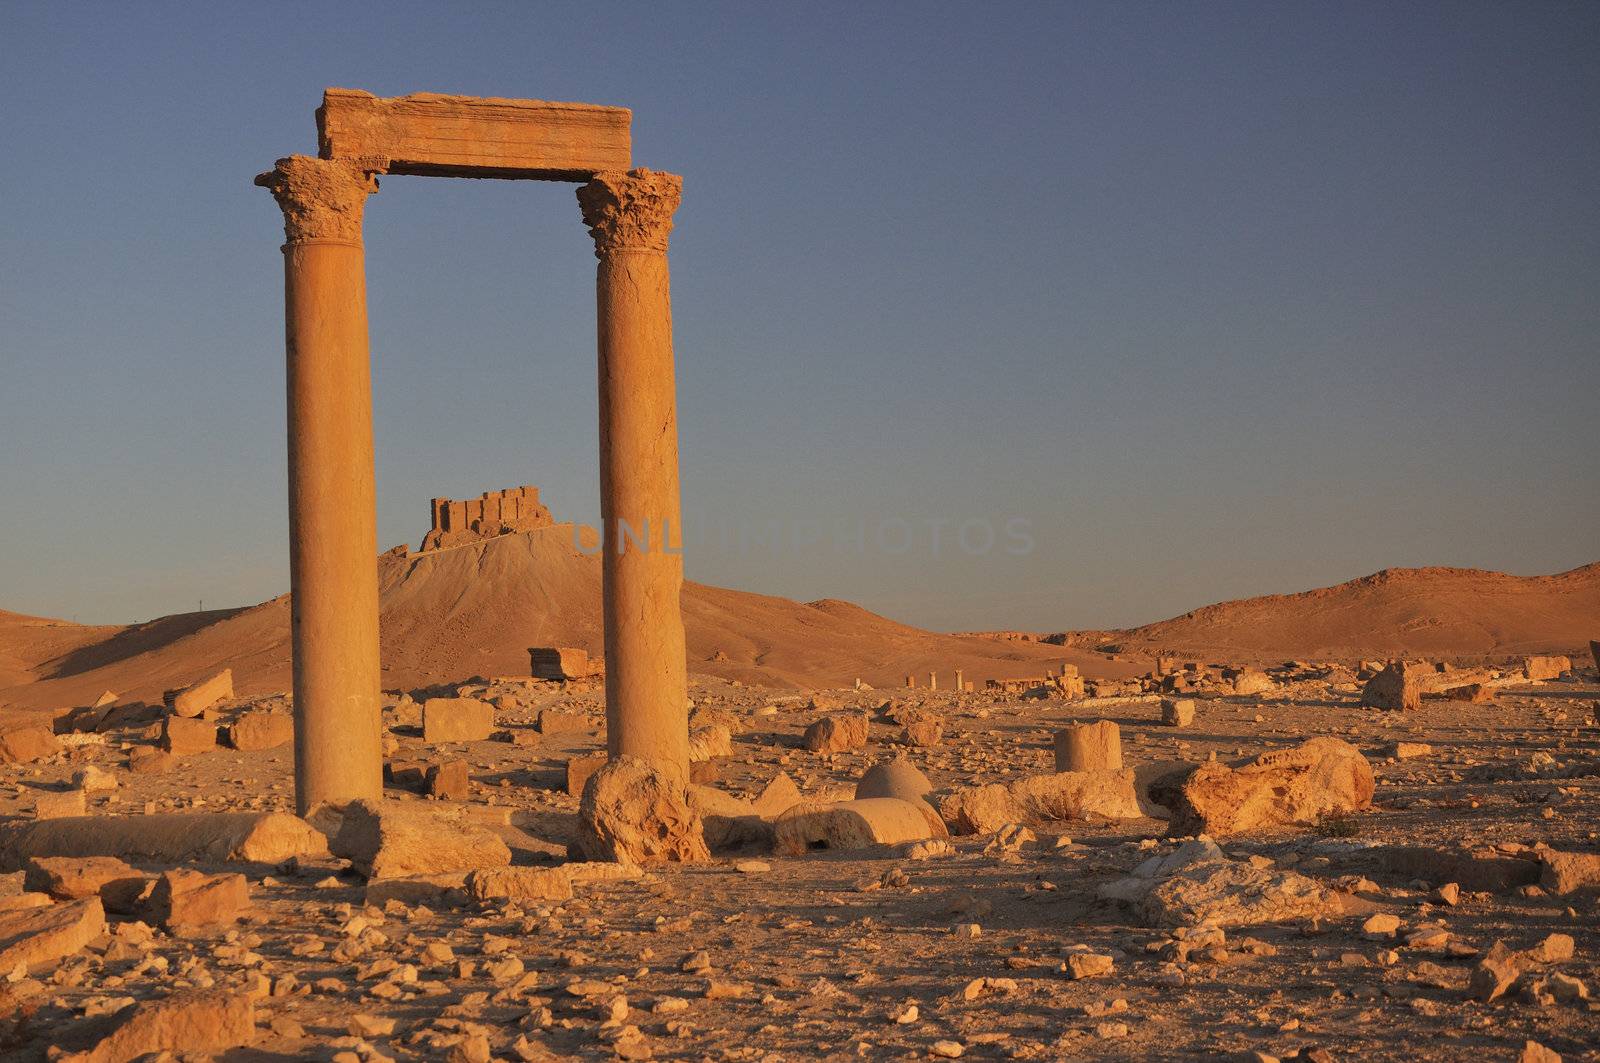 Fakhr-al-Din al-Ma'ani Castle or Palmyra Castle is a castle on a high hill overlooking the site of Palmyra, and named for the Druze emir Fakhr-al-Din II, who extended the Druze domains to the region of Palmyra during the 16th century. The castle was probably built by the Mamluks in the 13th century. The castle was surrounded by a moat, with access only available through a drawbridge.